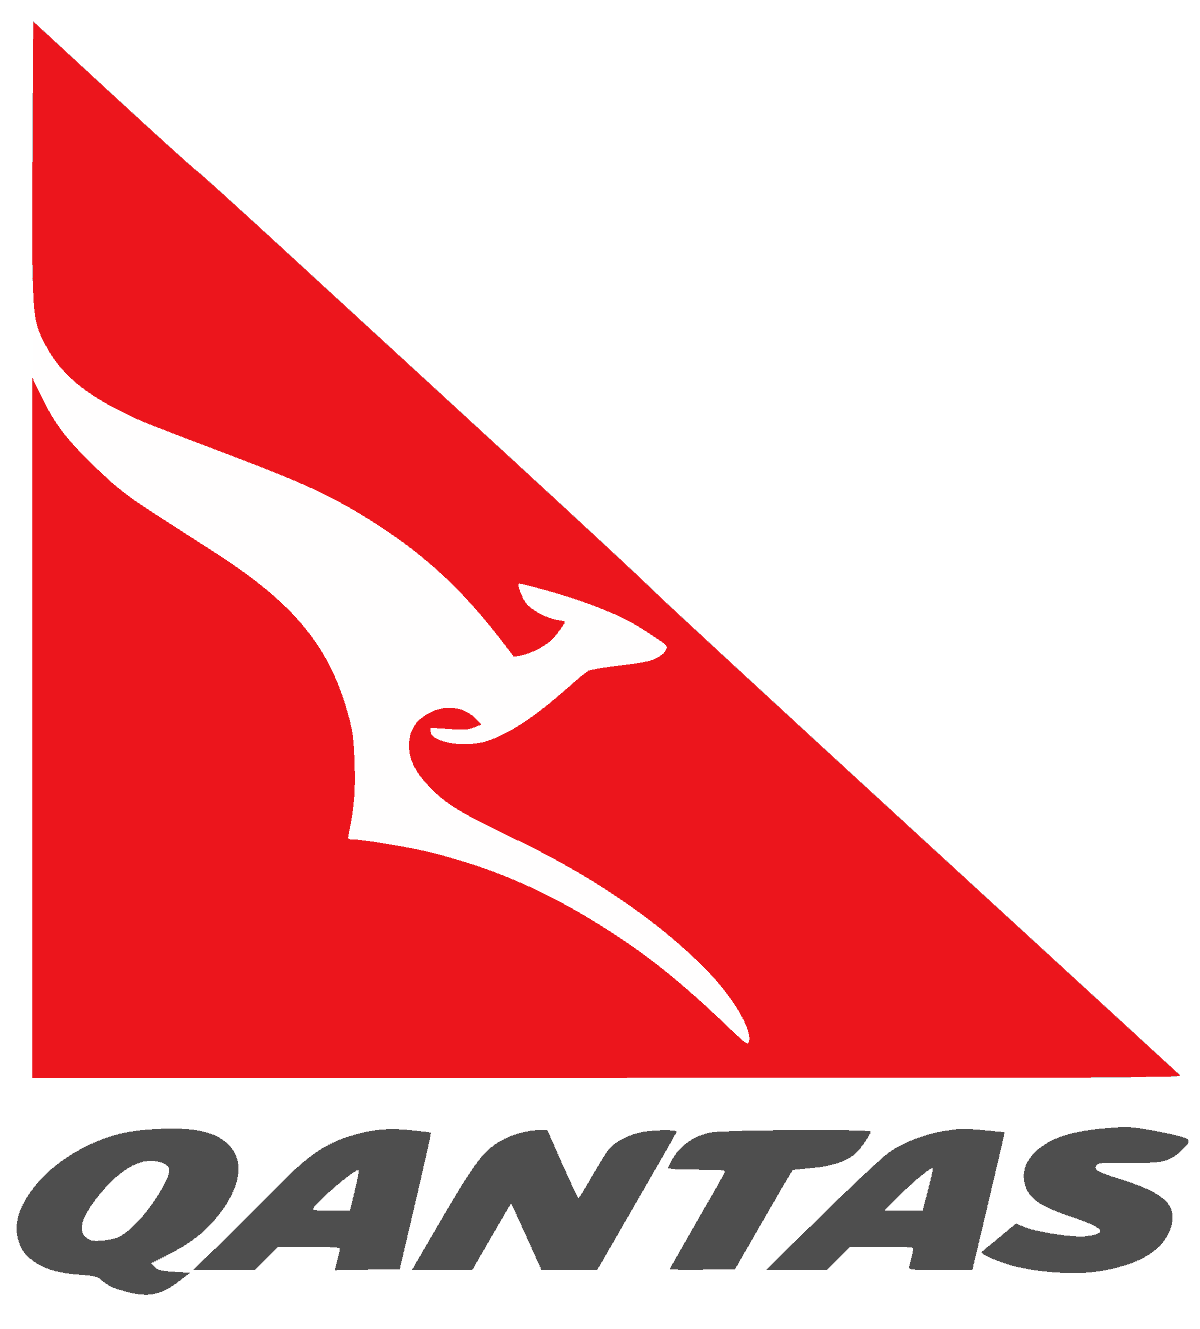 The qantas logo featuring a kangaroo, designed with the guidance of a startup coach.